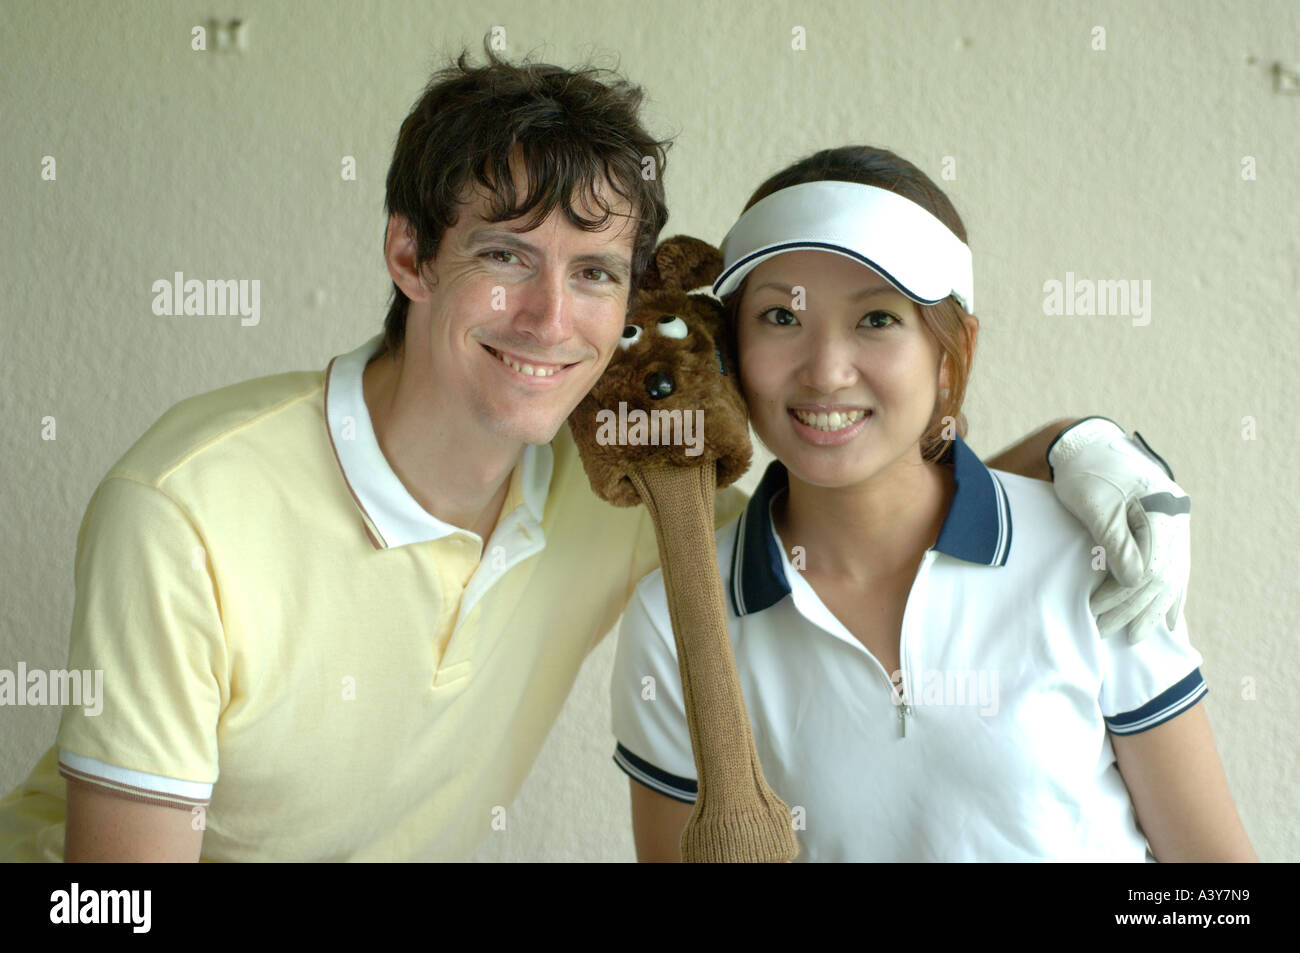 A couple smiles at the camera with a cute club cover in between them Stock Photo